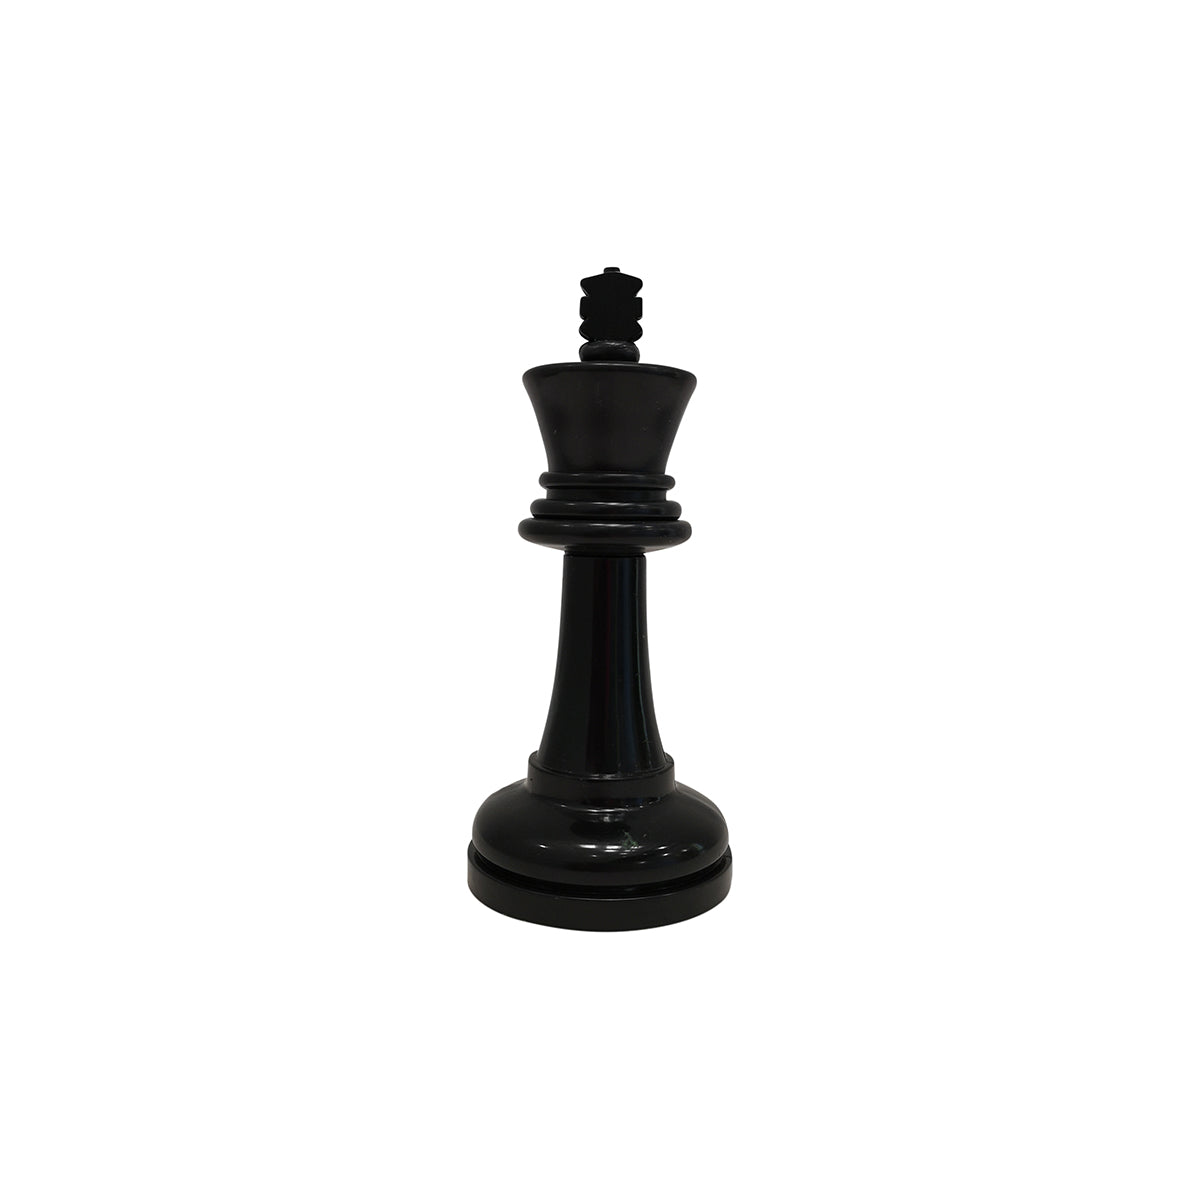 Traditional Garden Games Chess Replacement Pieces BLACK KING